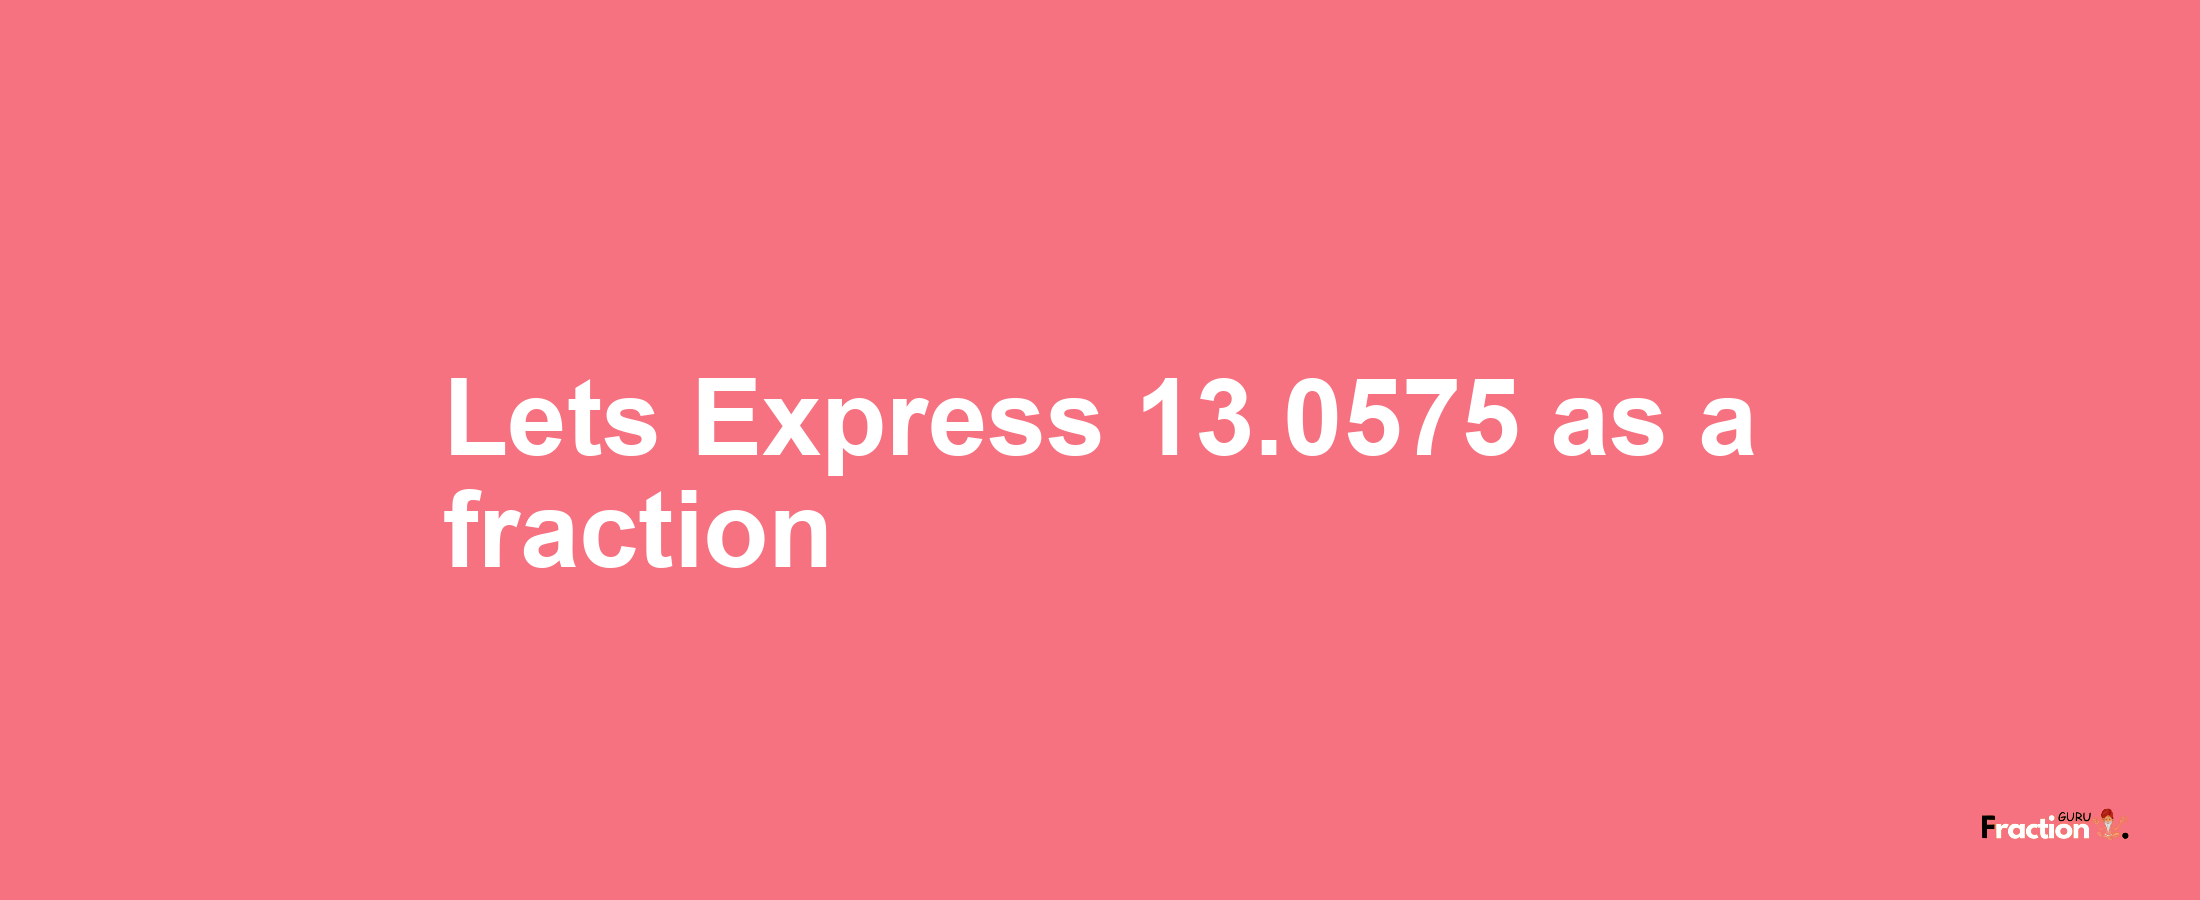 Lets Express 13.0575 as afraction